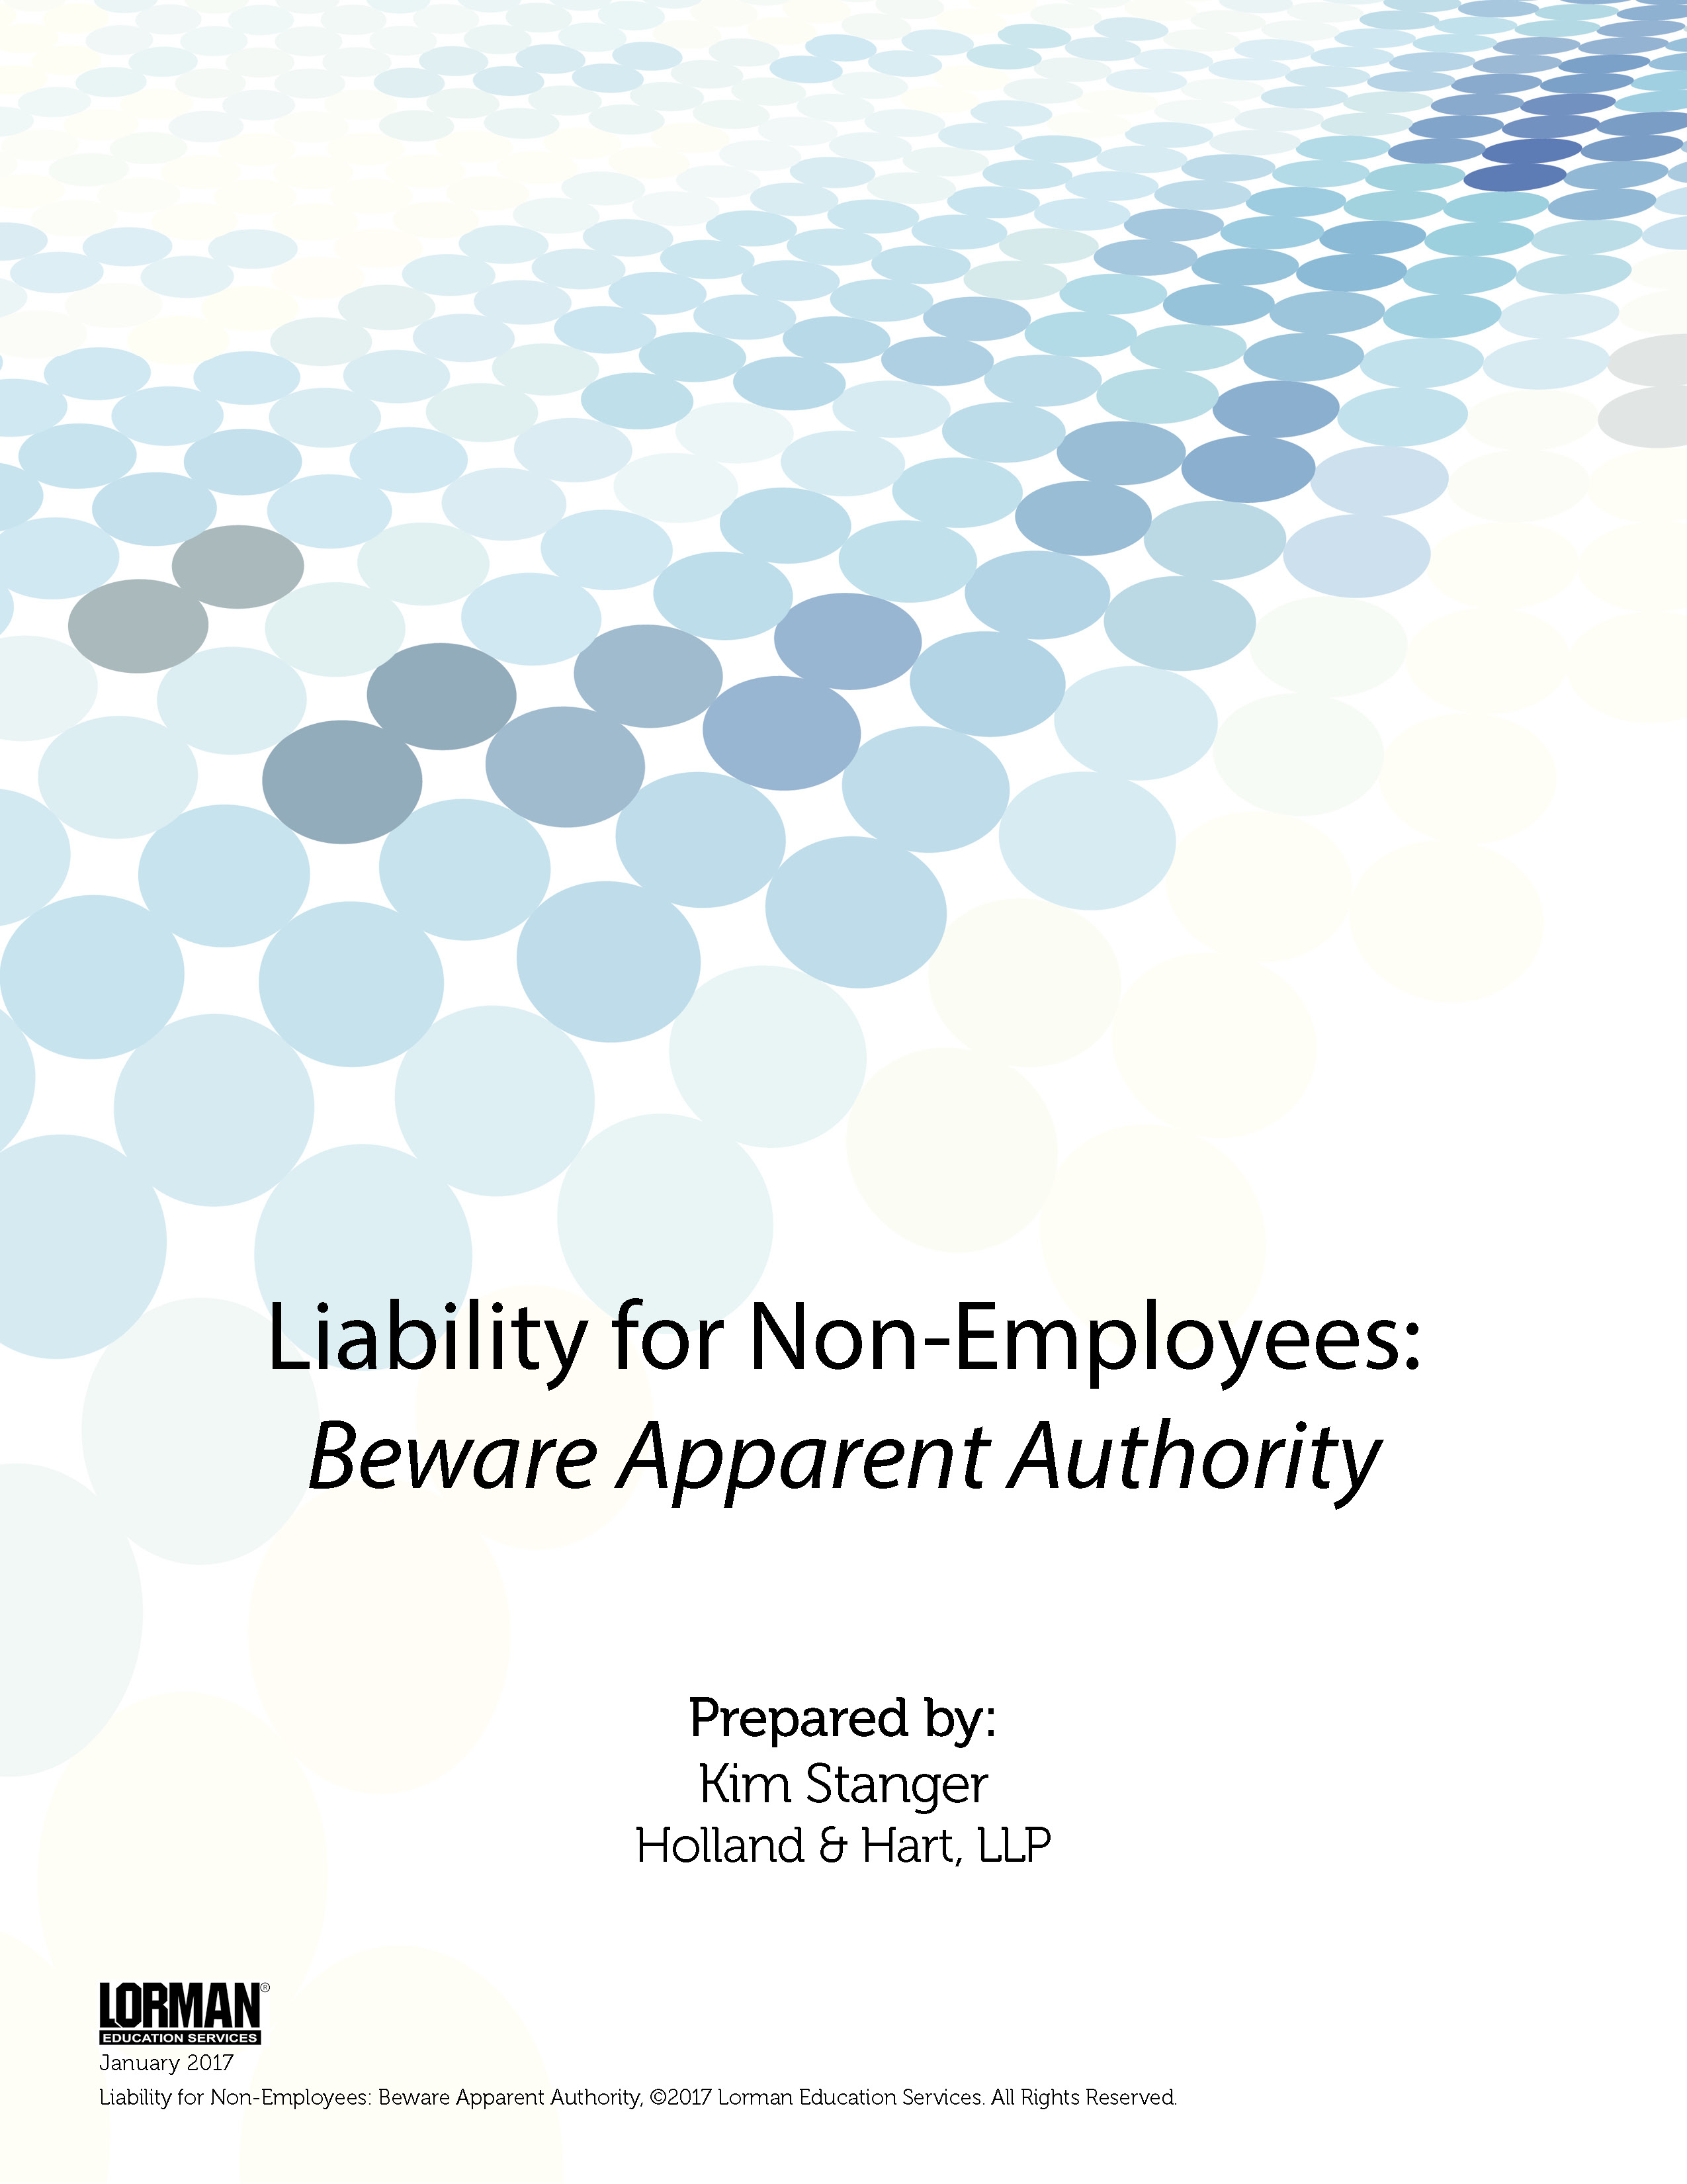 Liability for Non-Employees - Beware Apparent Authority